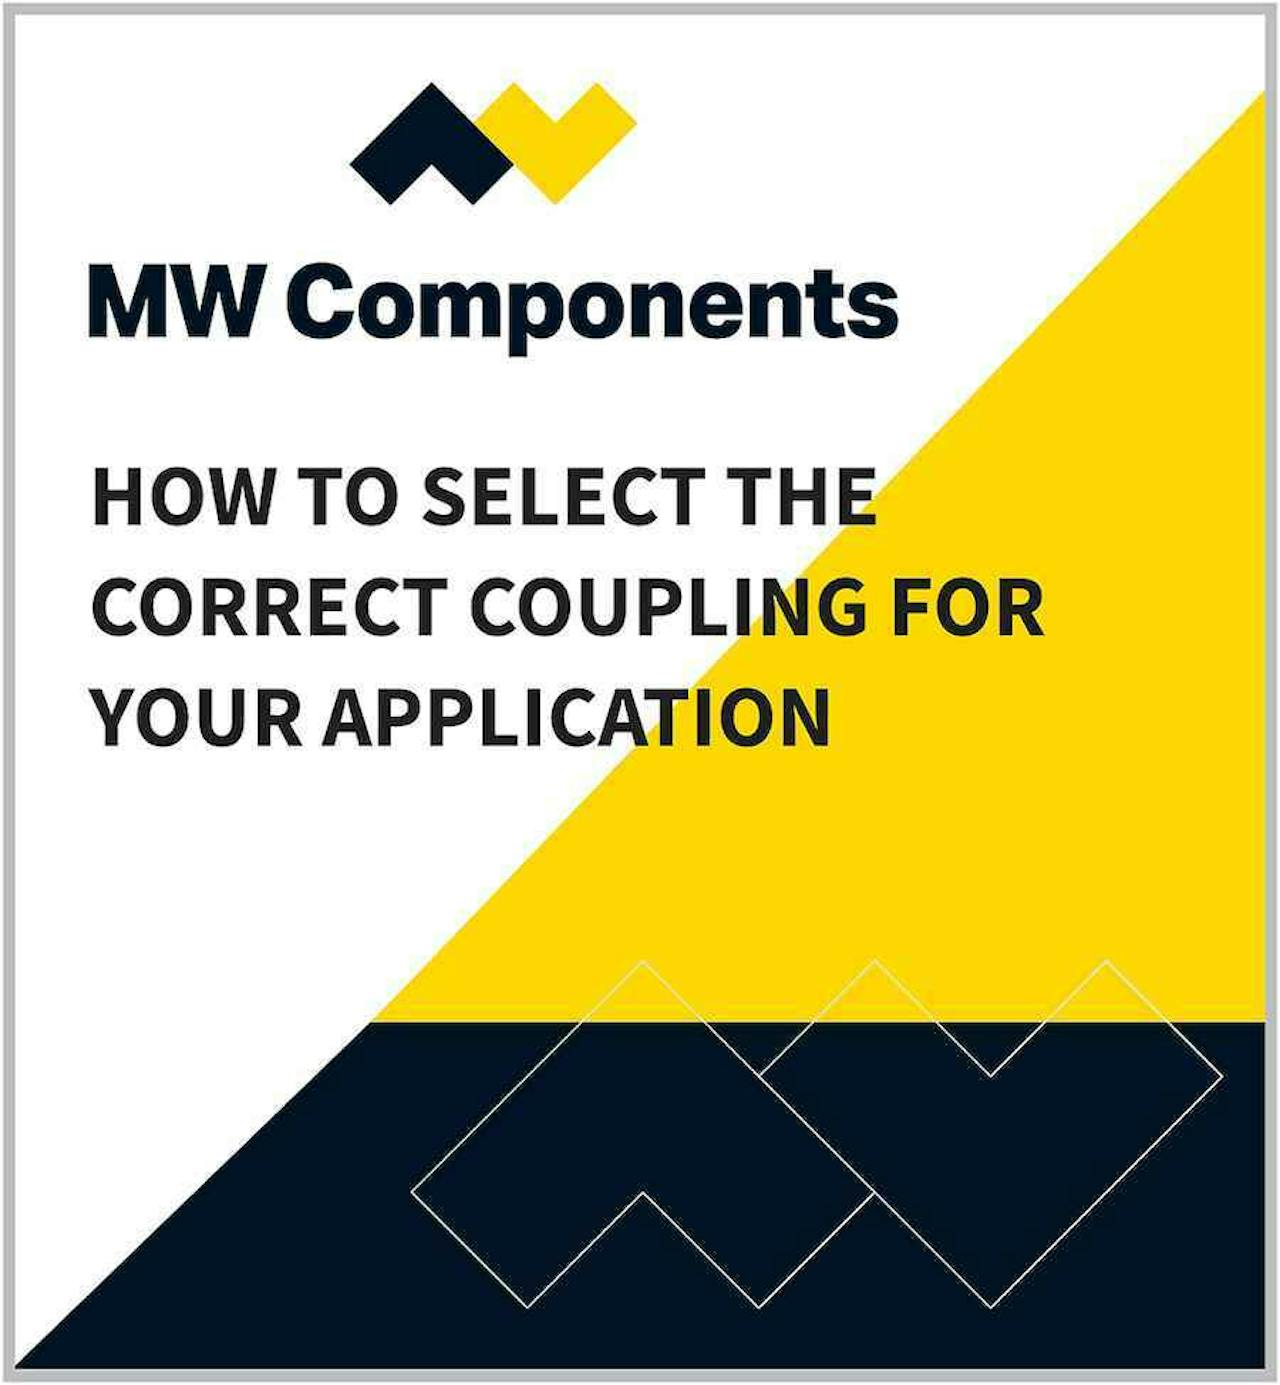 MWC How to Select the Correct Coupling for Your Application